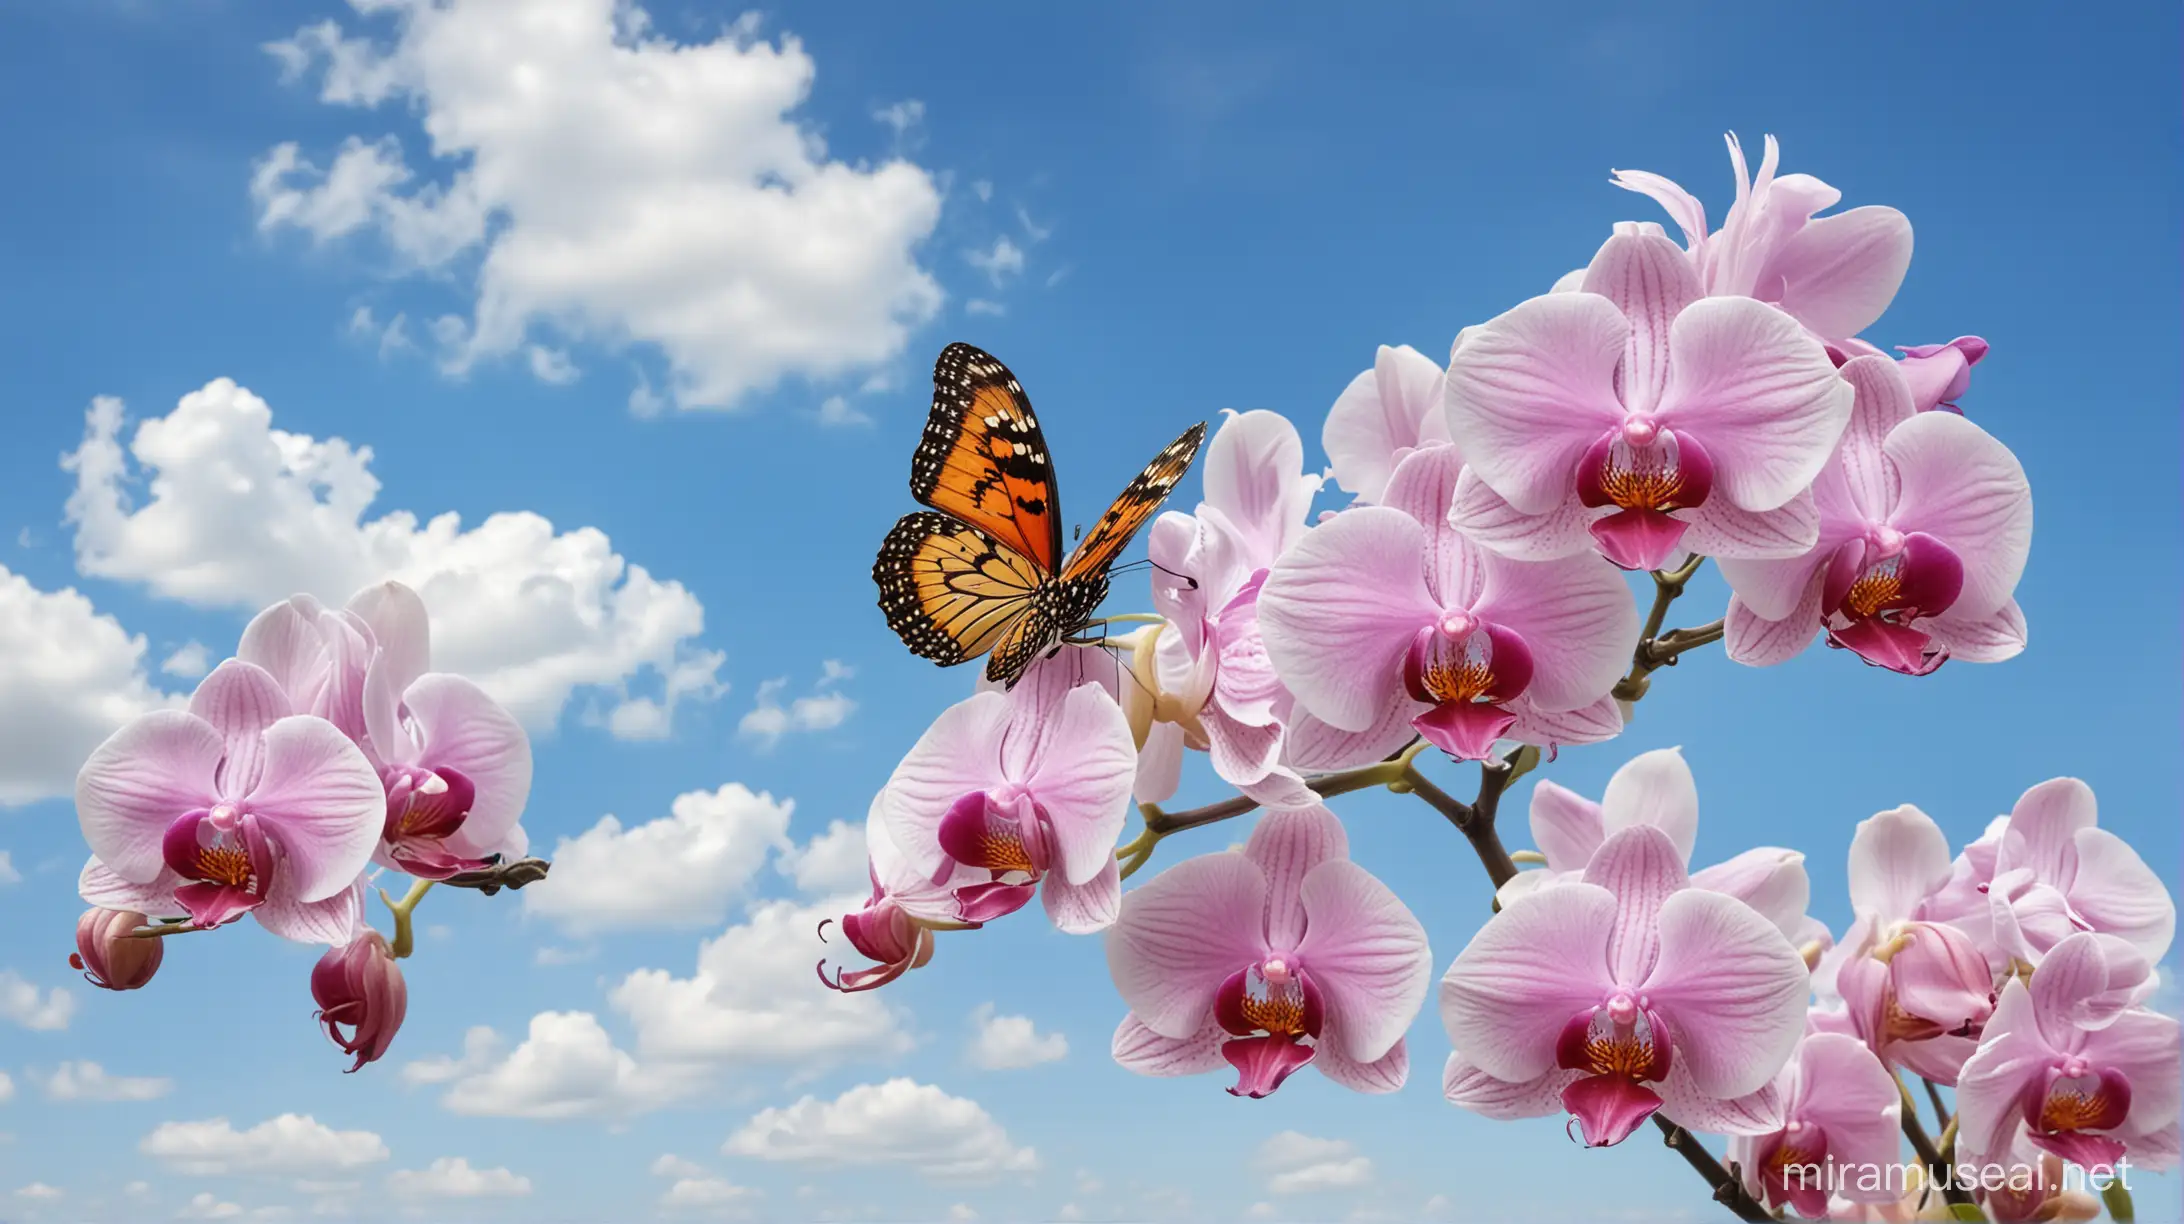 Vibrant Butterfly Fluttering Among Orchids under a Clear Blue Sky